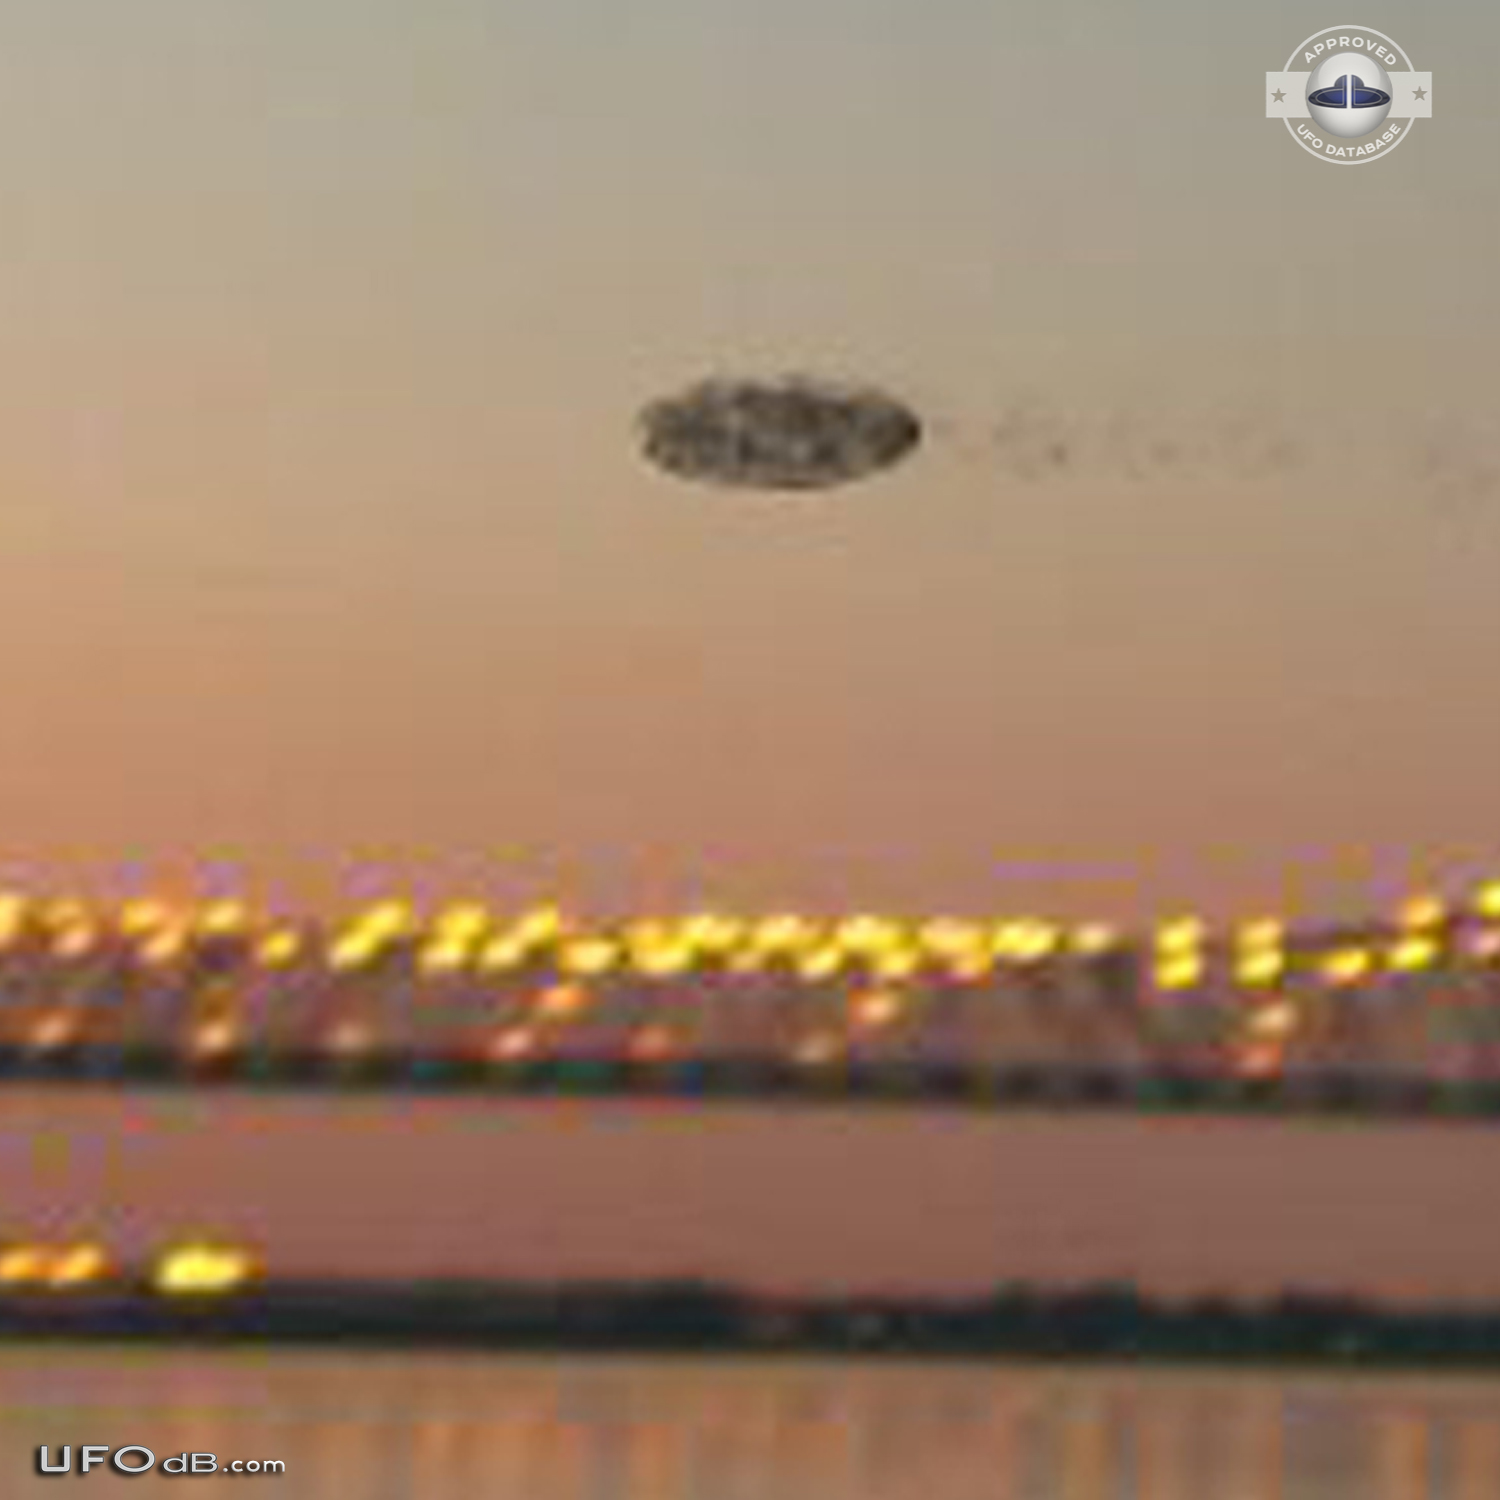 Dark shadowy disc UFO over the Mississippi New Orleans Louisiana 2012 UFO Picture #513-3